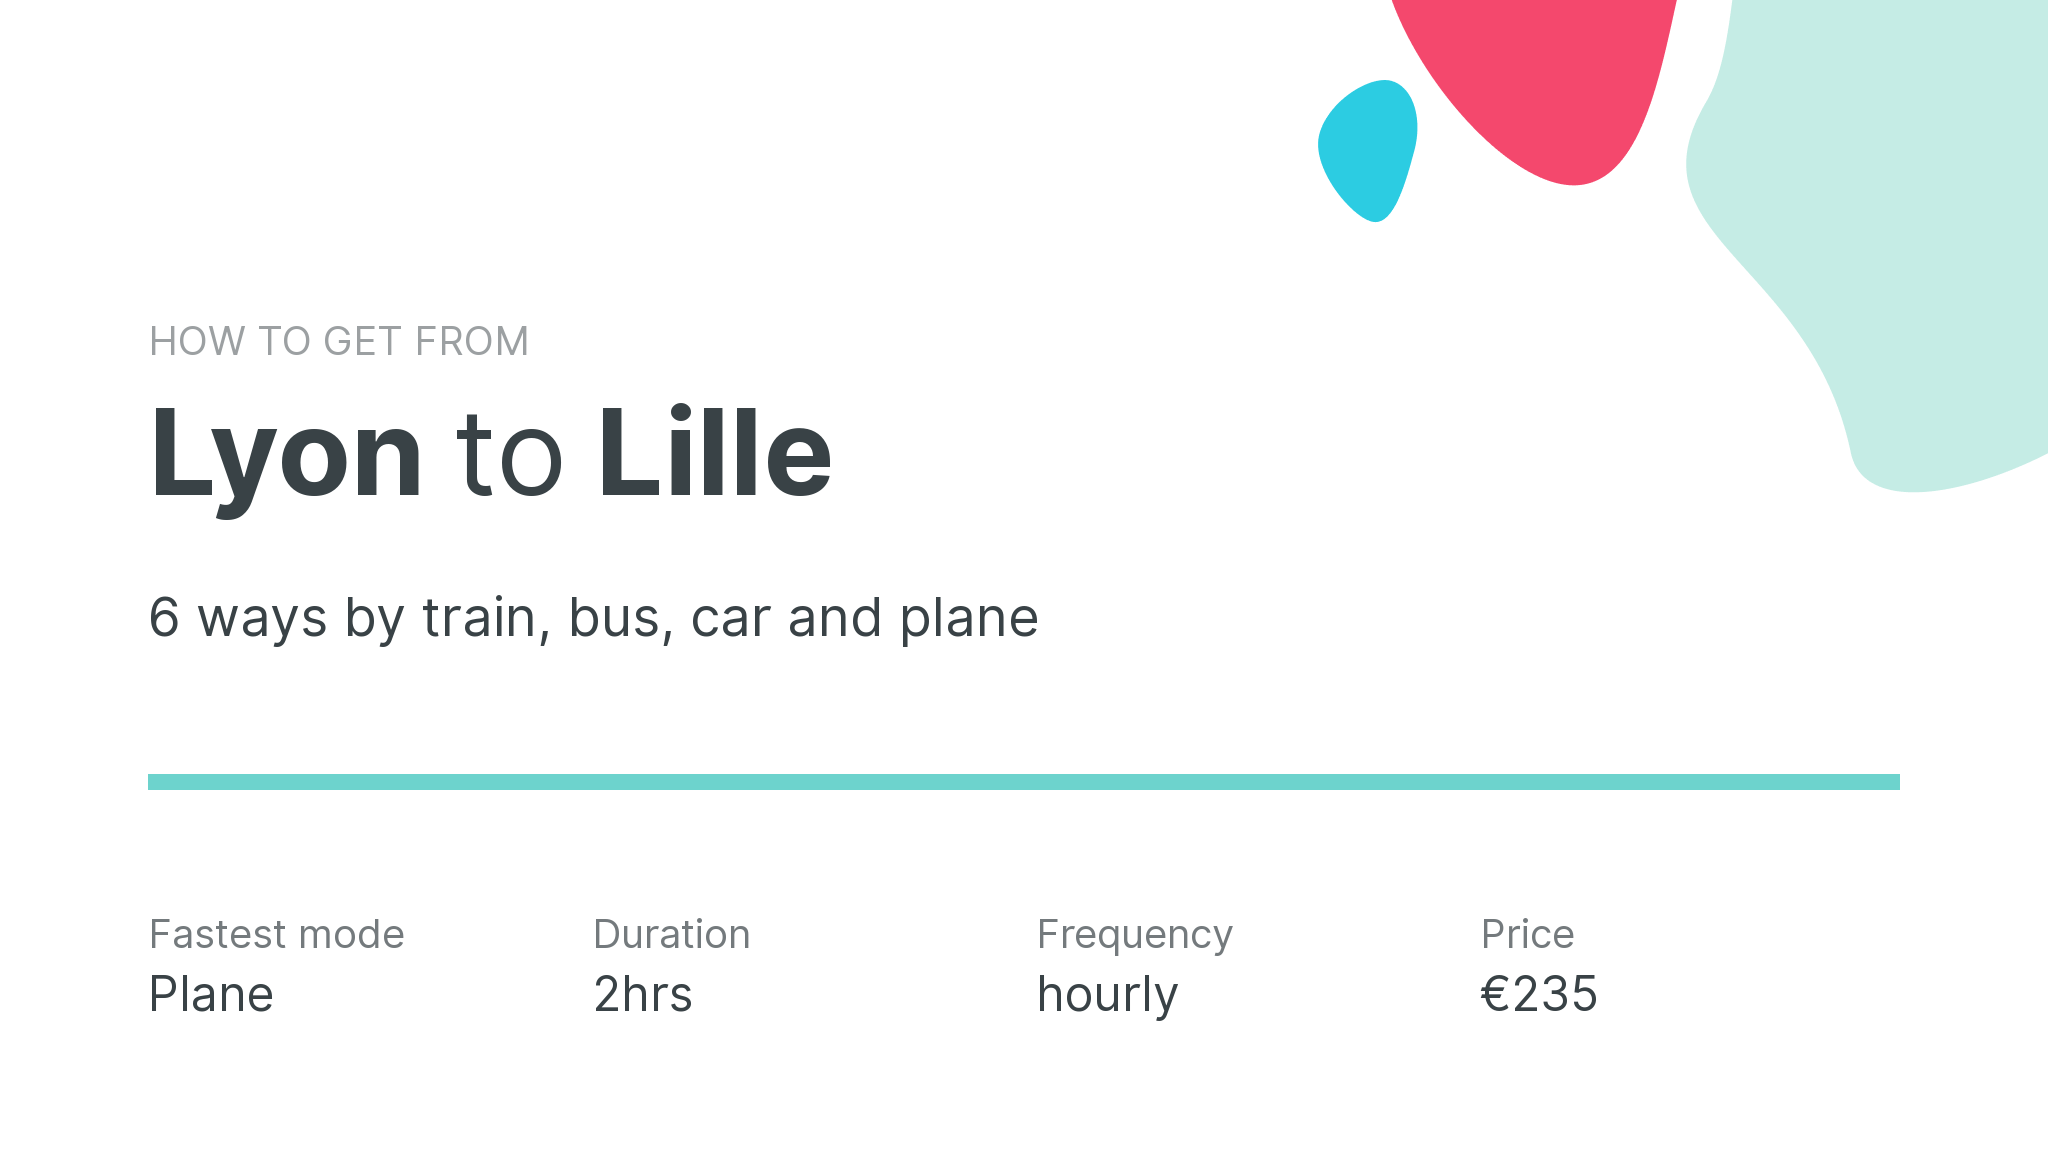 How do I get from Lyon to Lille